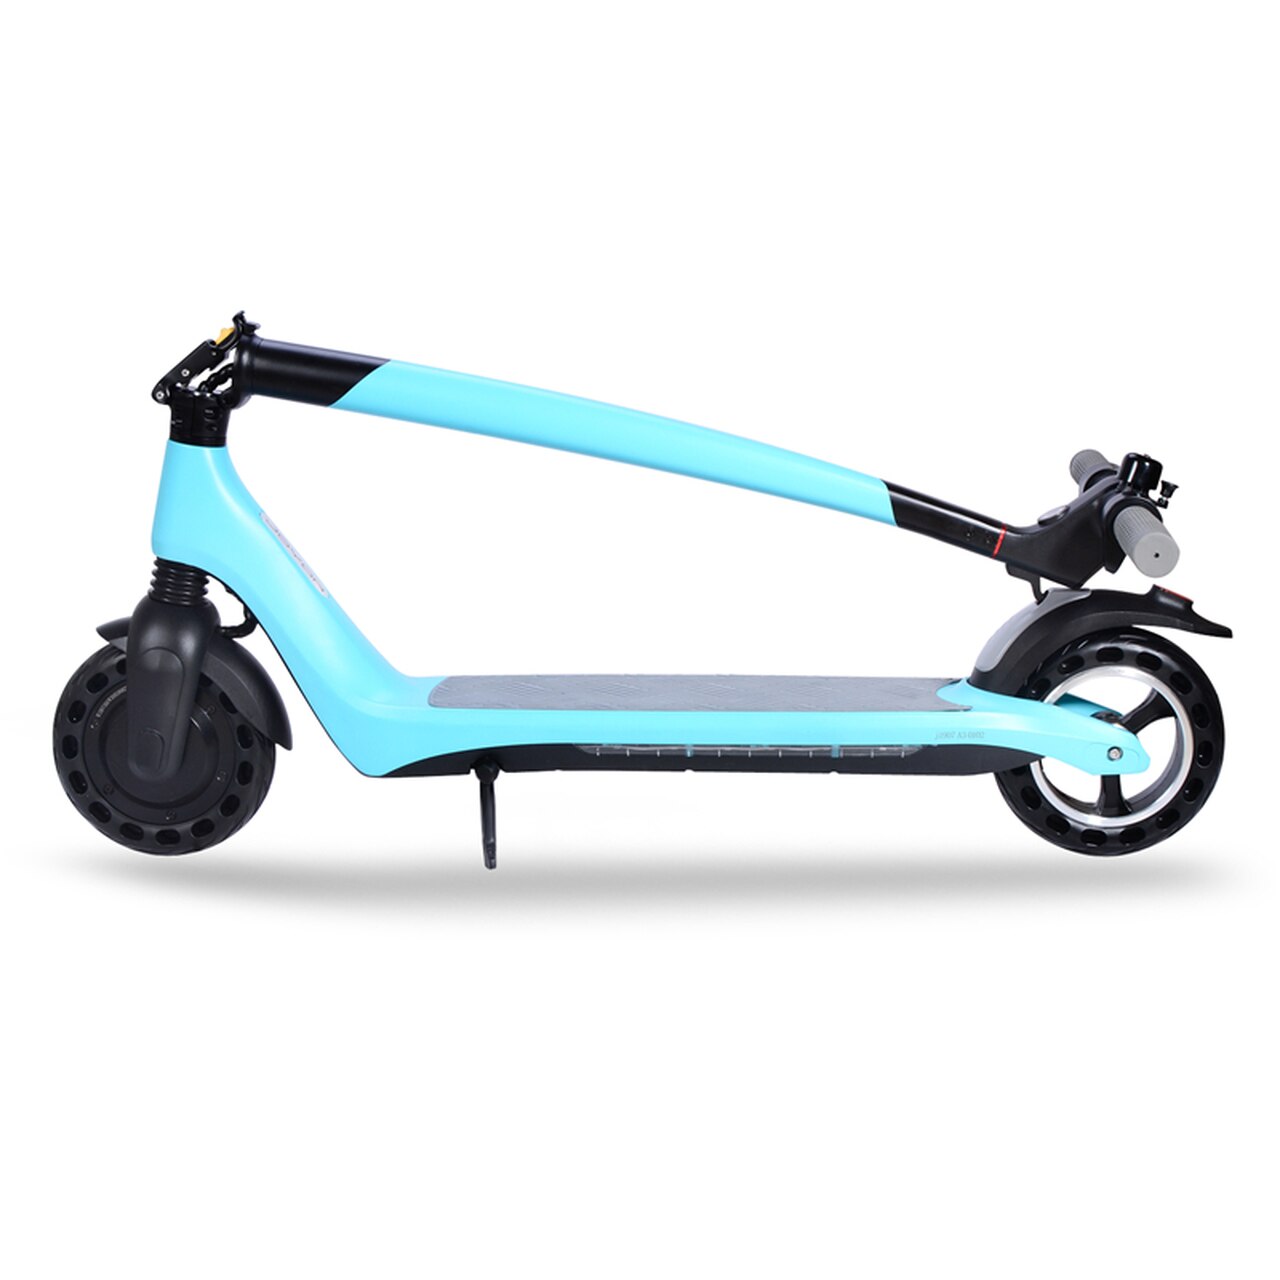 Joyor A3 Up to 21.7 Mile Range 8" Tires Electric Scooter Blue New